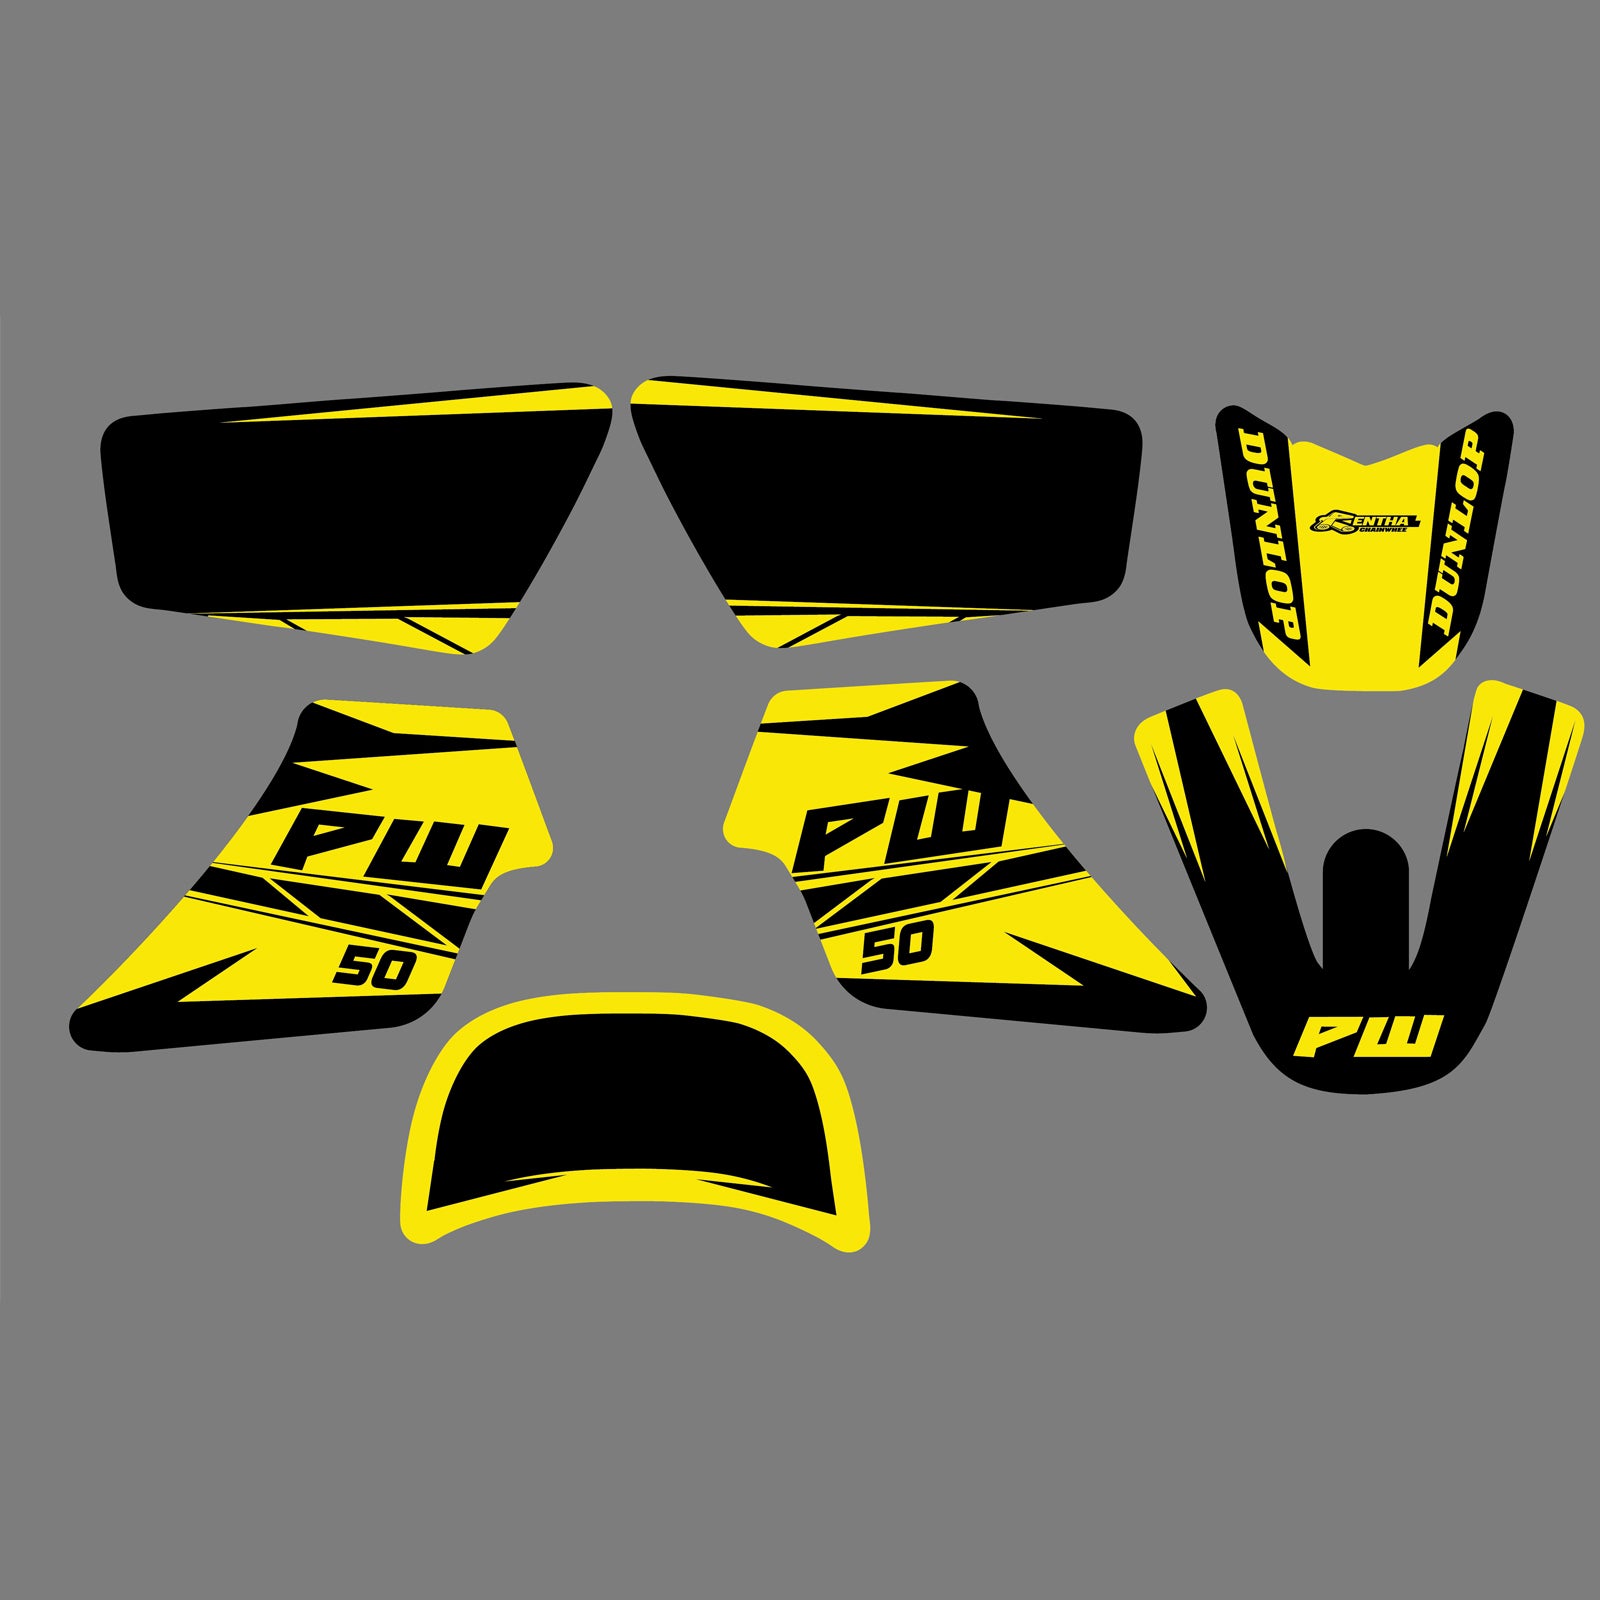 Motorcycle TEAM Personality Decals Stickers Kits For Yamaha 50 PIT